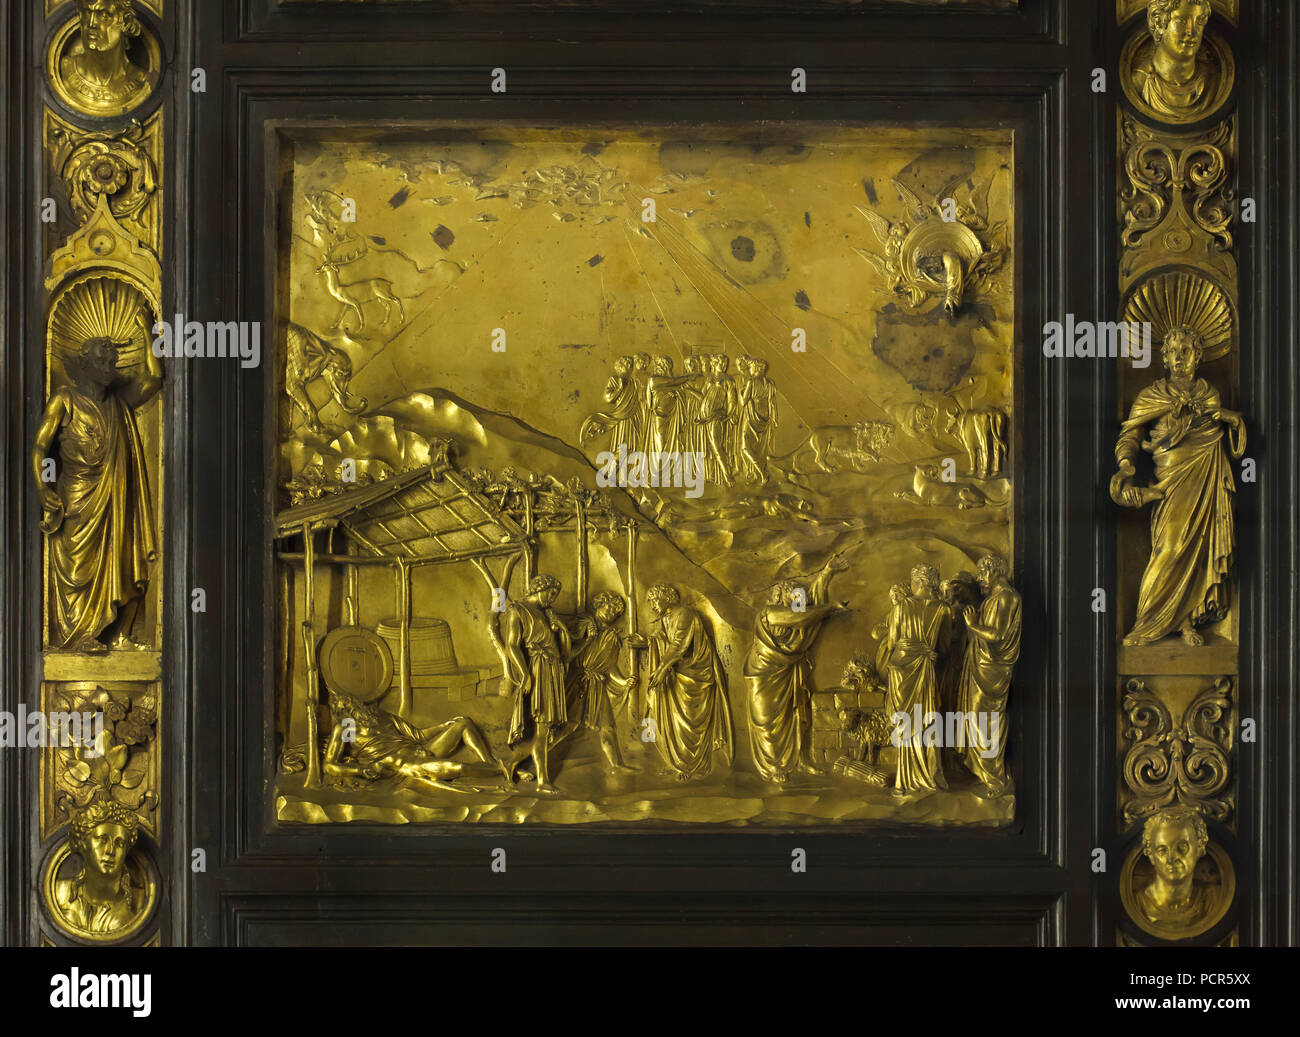 Story of Noah depicted in the gilded bronze panel from the Gates of Paradise (Porta del Paradiso) designed by Italian Early Renaissance sculptor Lorenzo Ghiberti for the Florence Baptistery (Battistero di San Giovanni), now on display in the Museo dell'Opera del Duomo (Museum of the Works of the Florence Cathedral) in Florence, Tuscany, Italy. Noah's Ark (above), the Drunkenness of Noah (L) and the Sacrifice of Noah (R) are depicted in the panel. Stock Photo